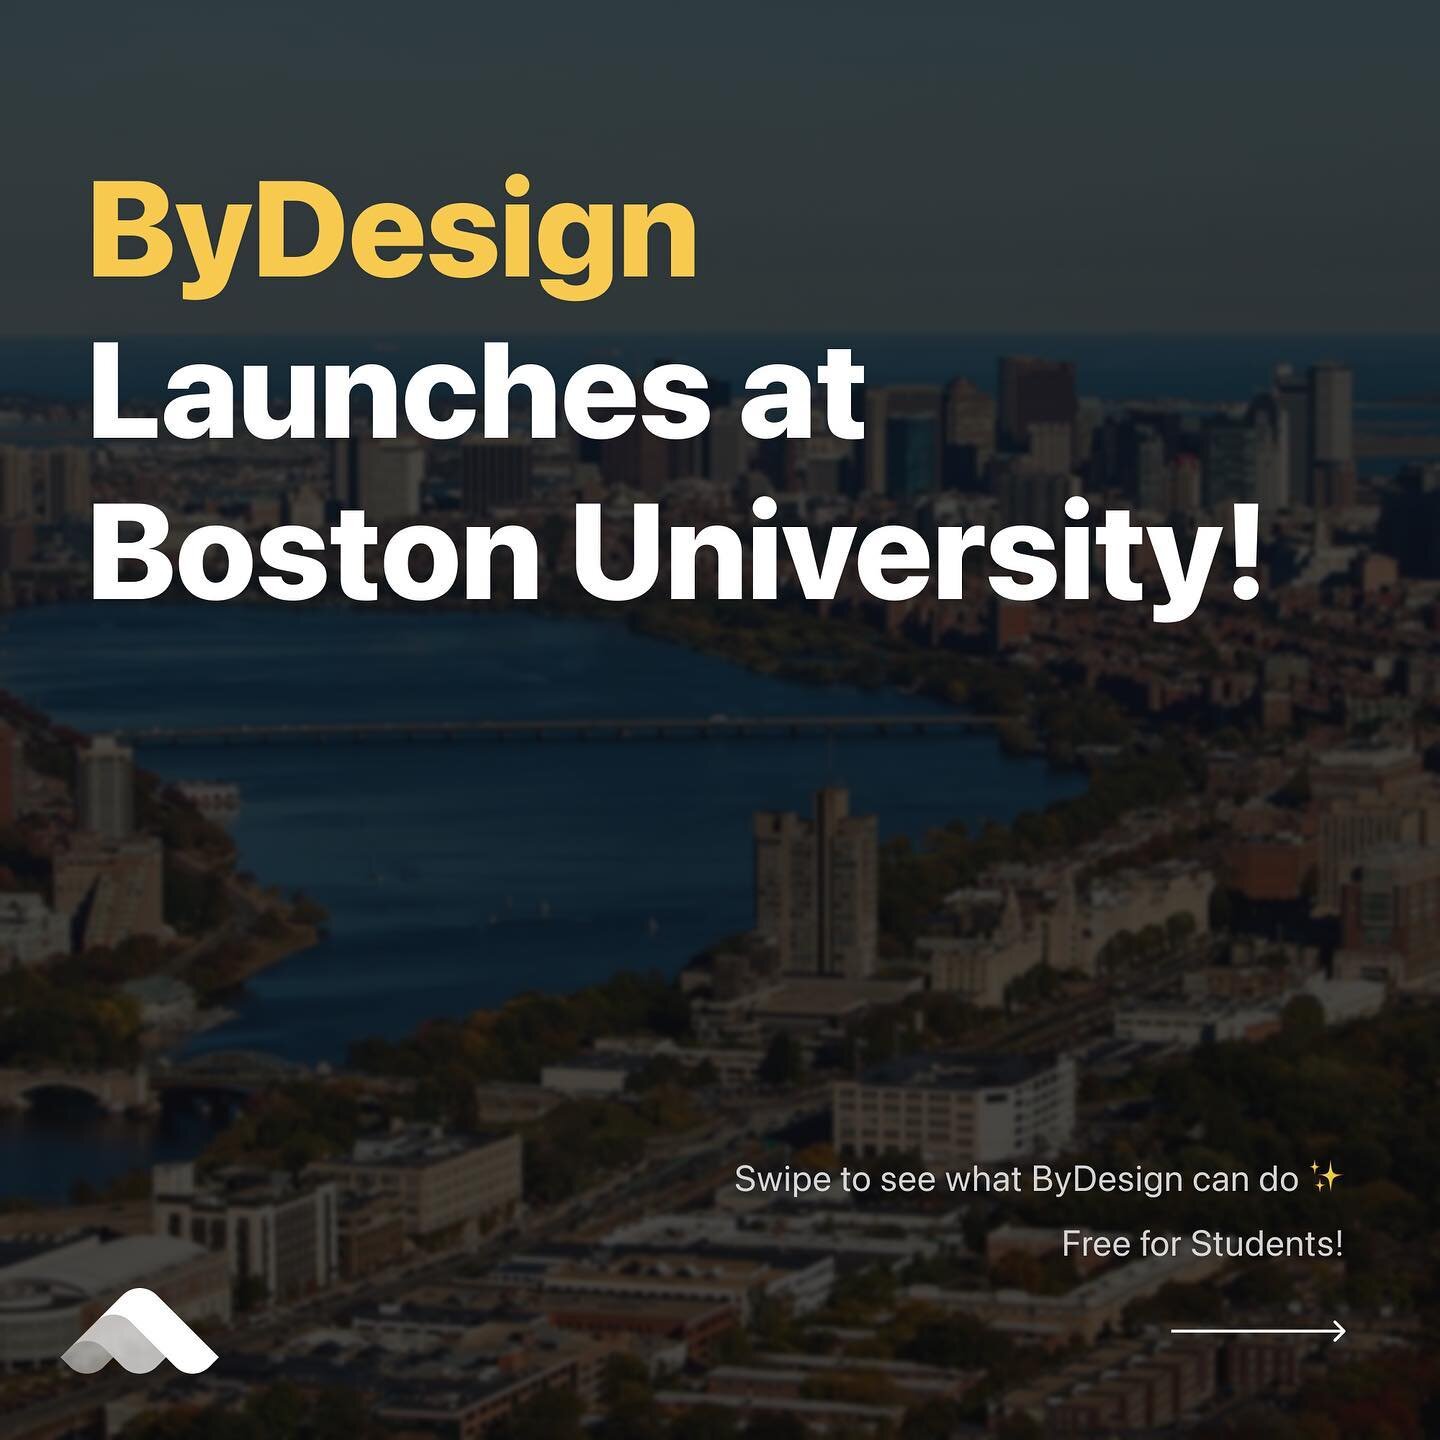 We have officially launched at BU!

#bostonuniversity #boston #college